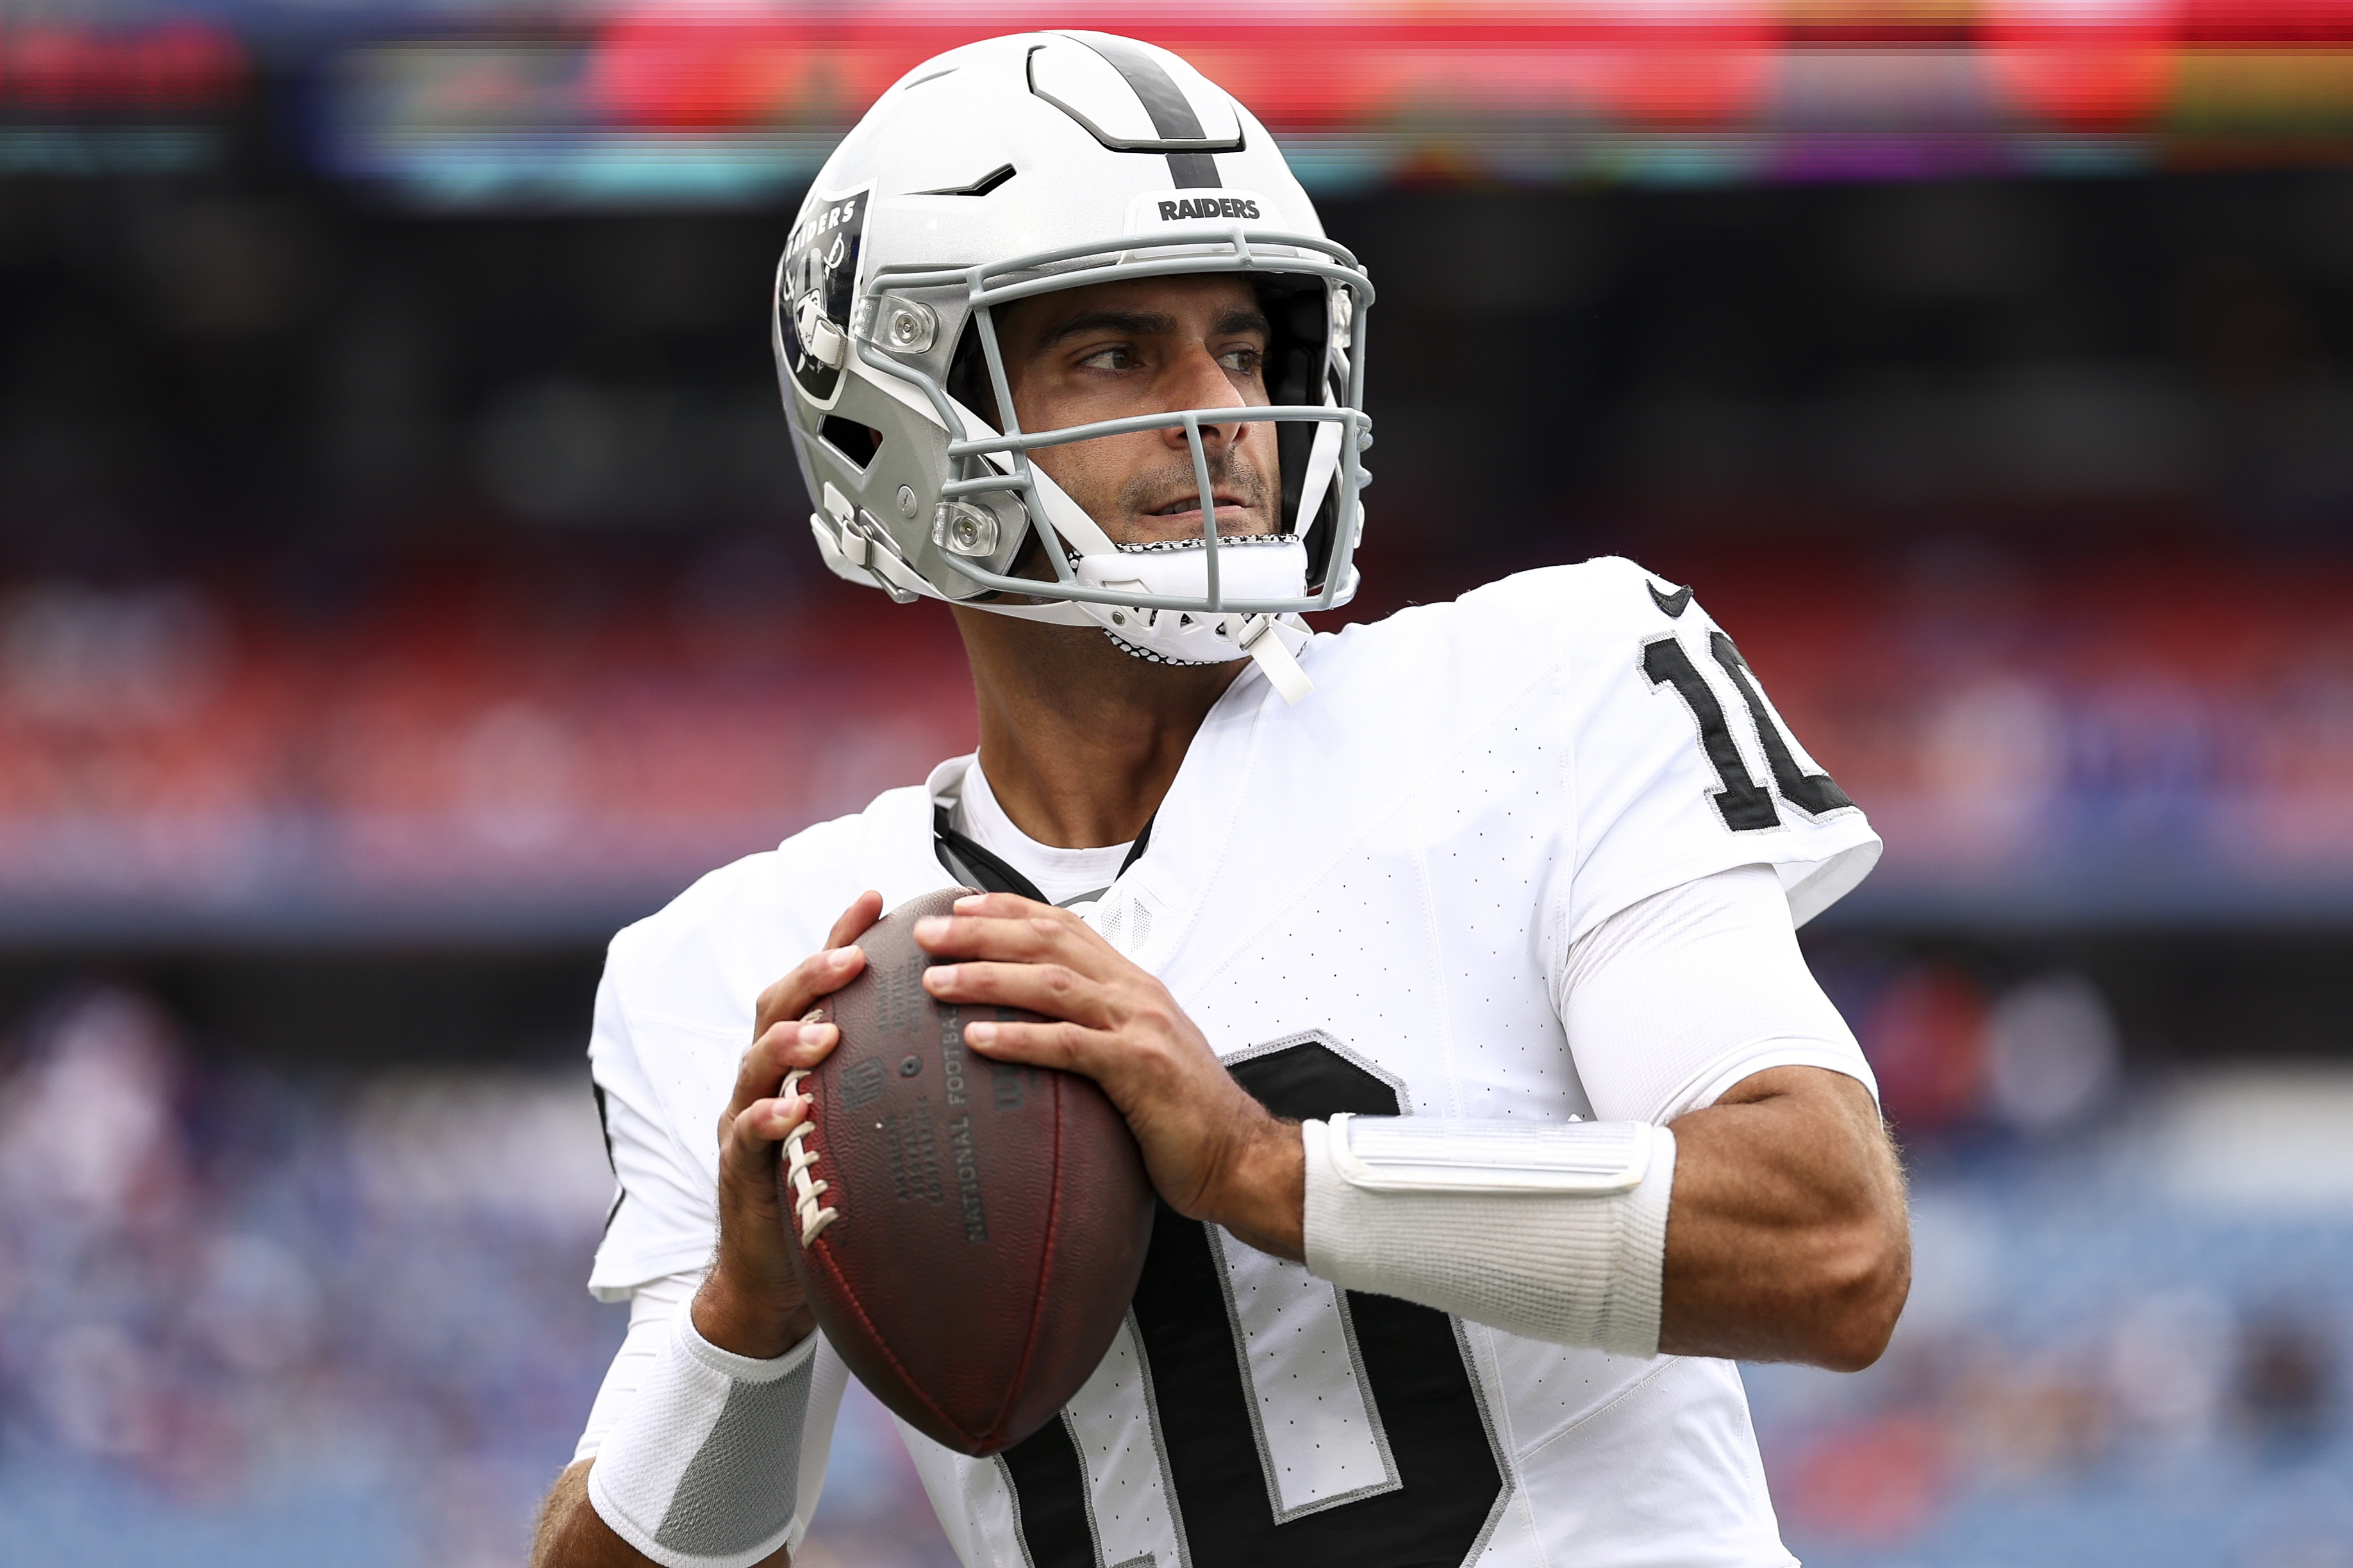 Raiders Bench QB Carr, Will Start Stidham for Final 2 Games - Bloomberg